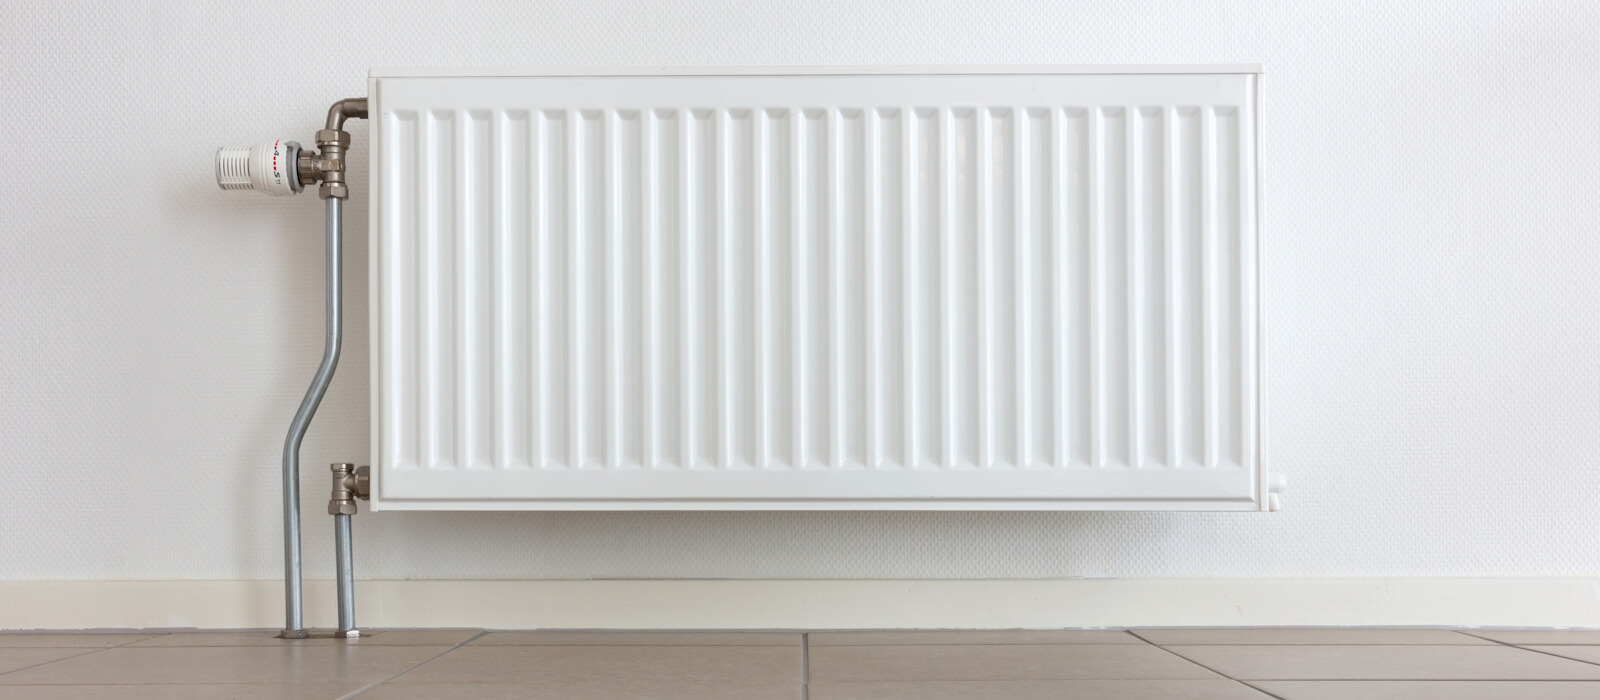 Heating Services in Ashford